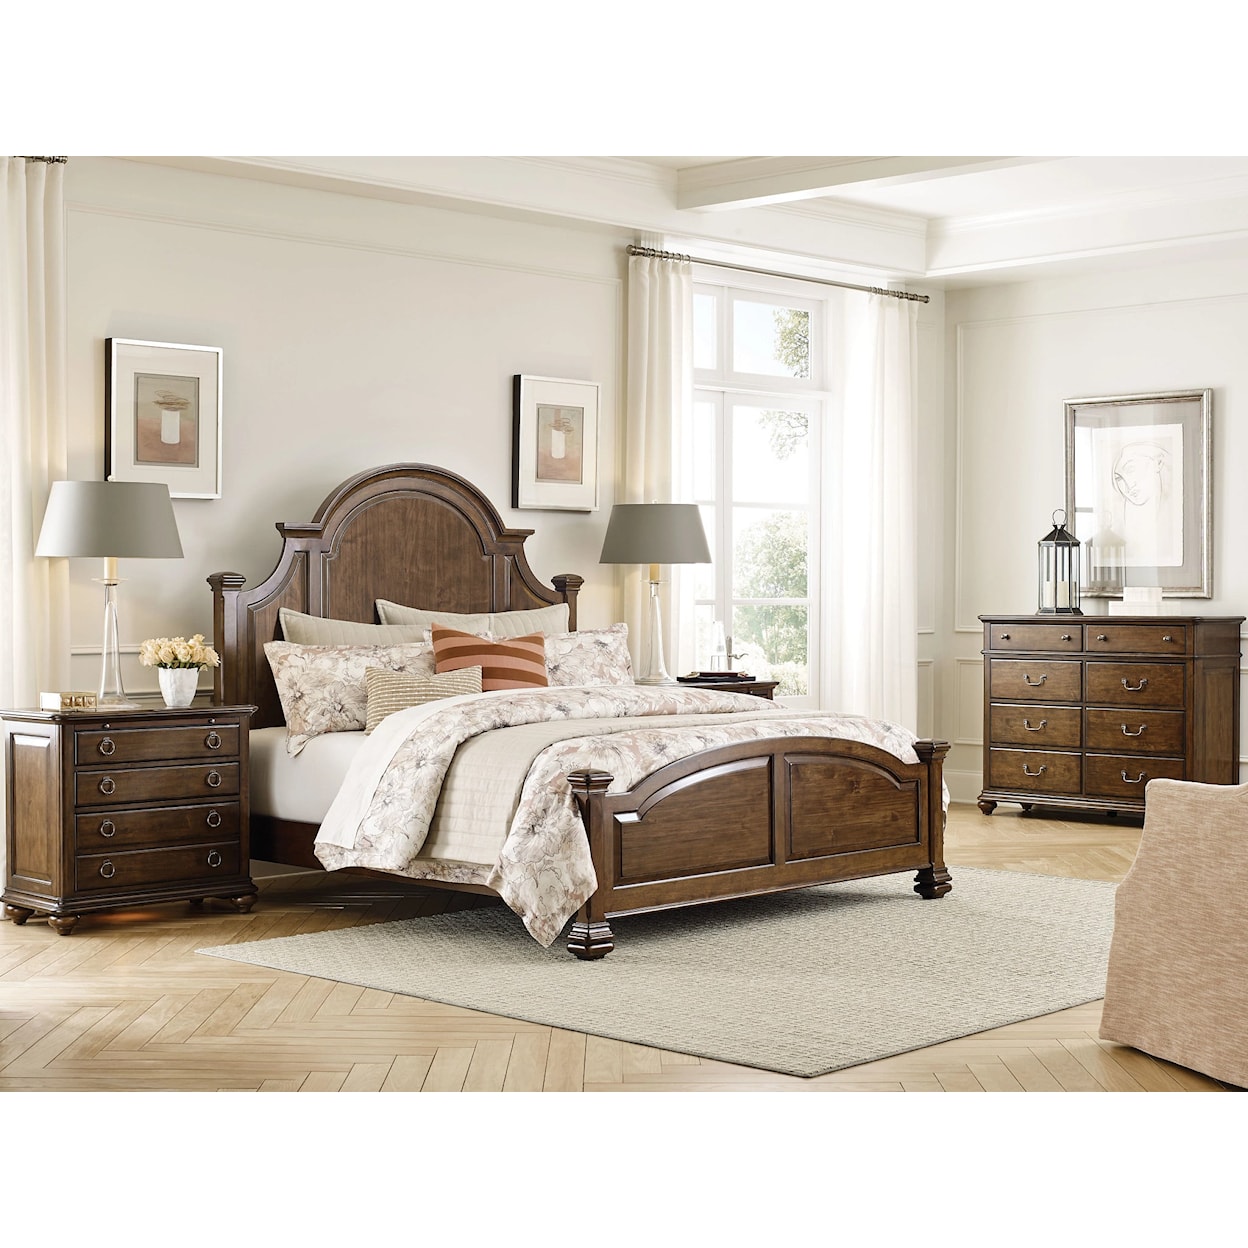 Kincaid Furniture Commonwealth Allenby Queen Panel Bed - Complete